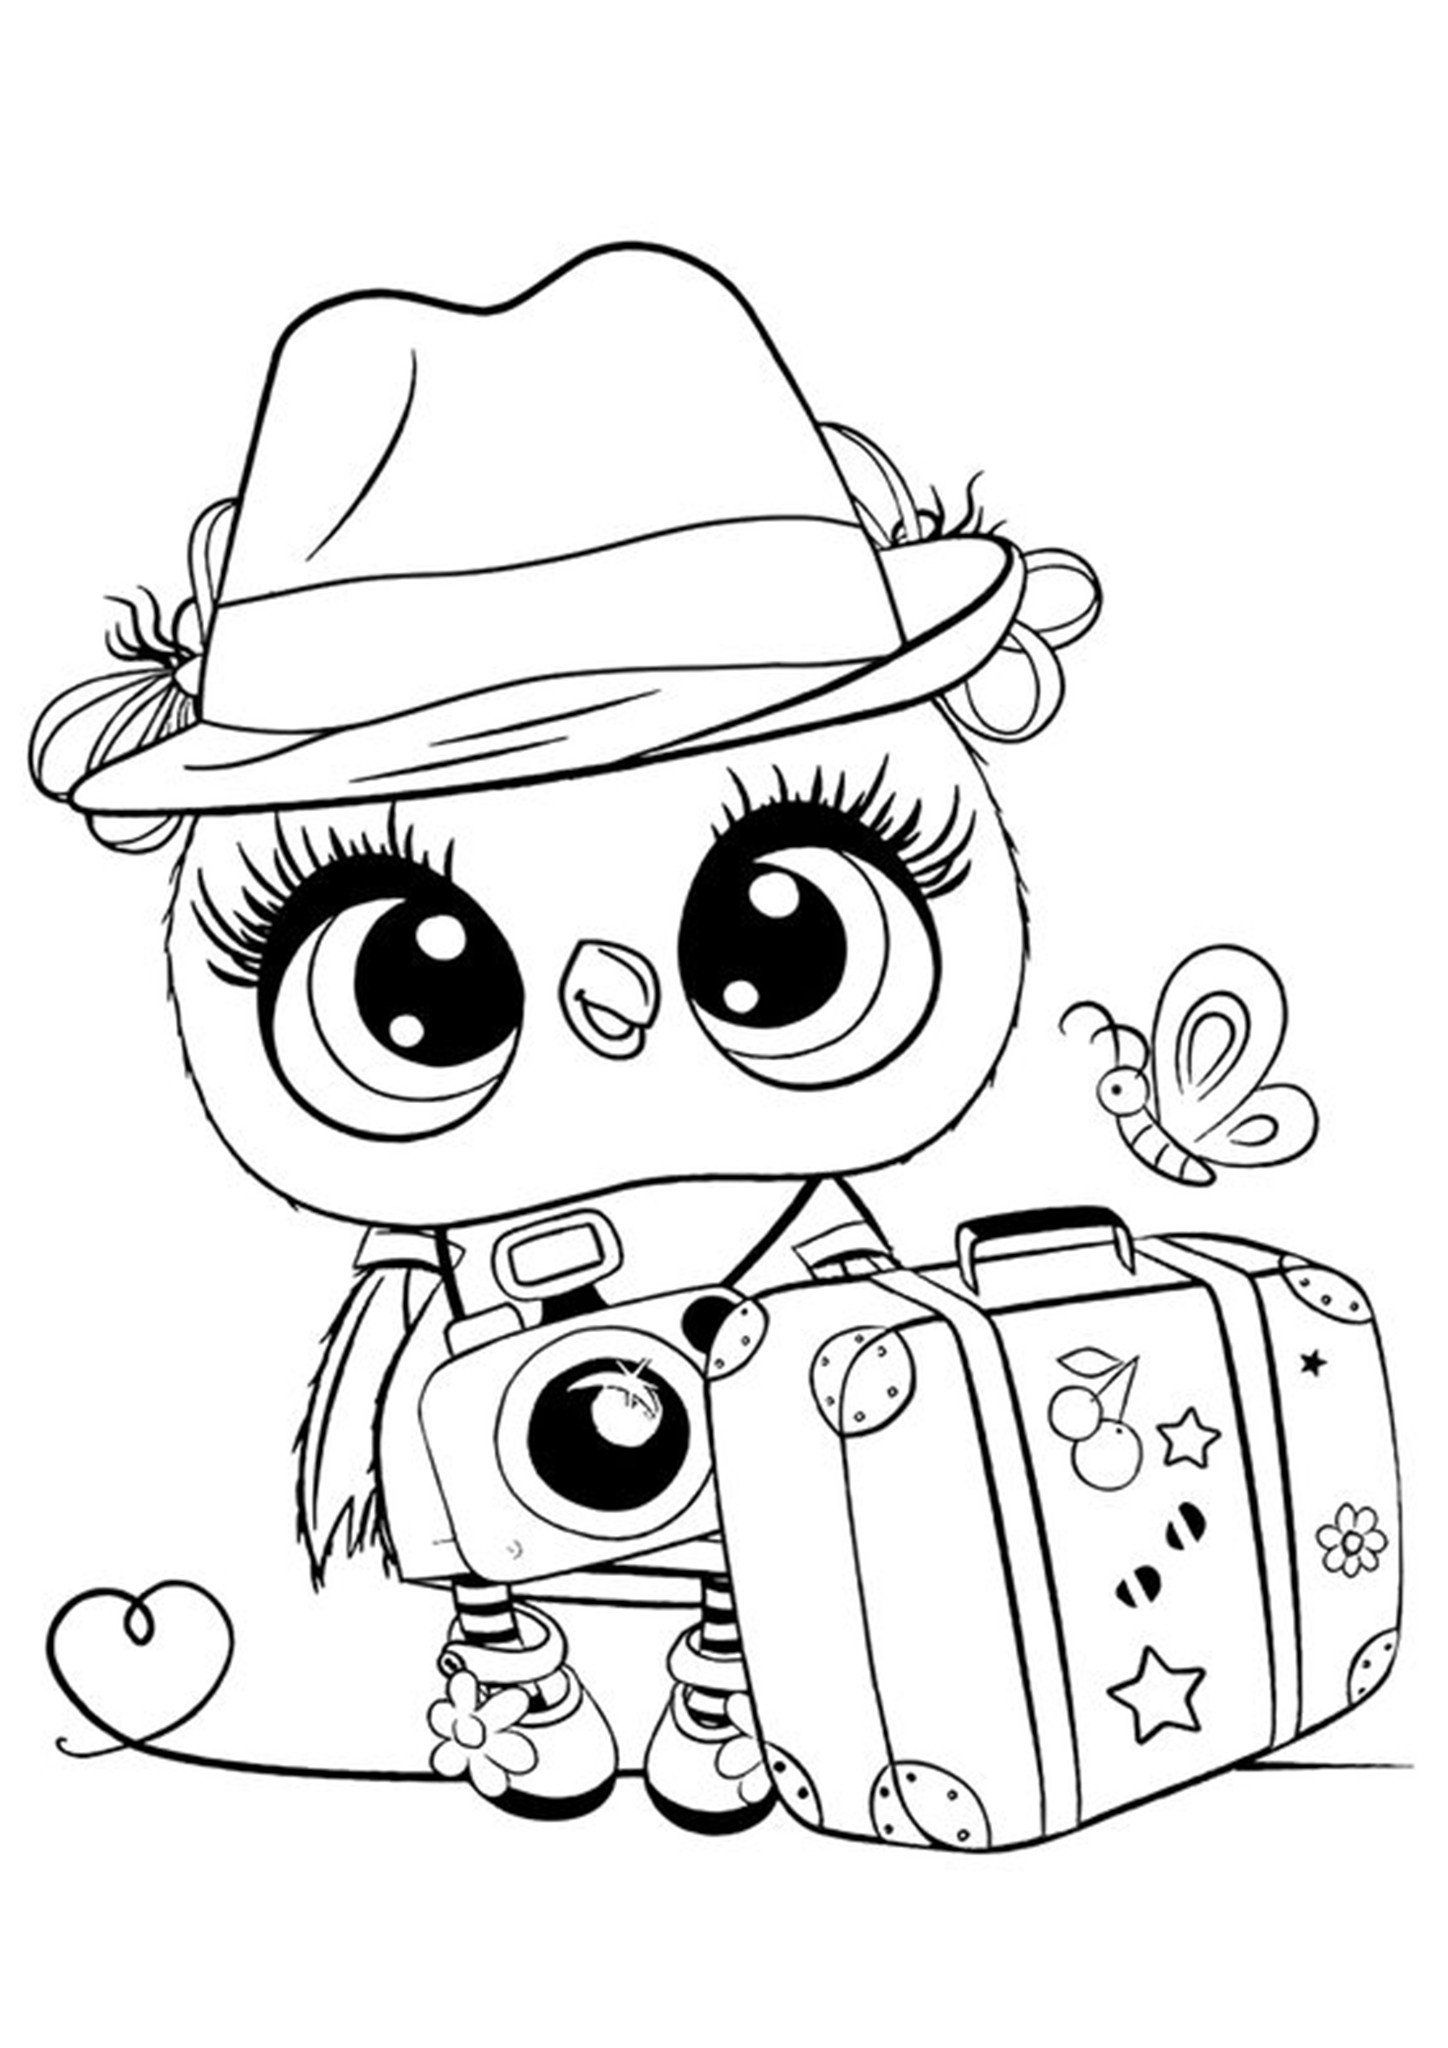 Adorable Cute Owl Coloring Pages Pdf Free - Adorable Cute Owl Coloring Pages